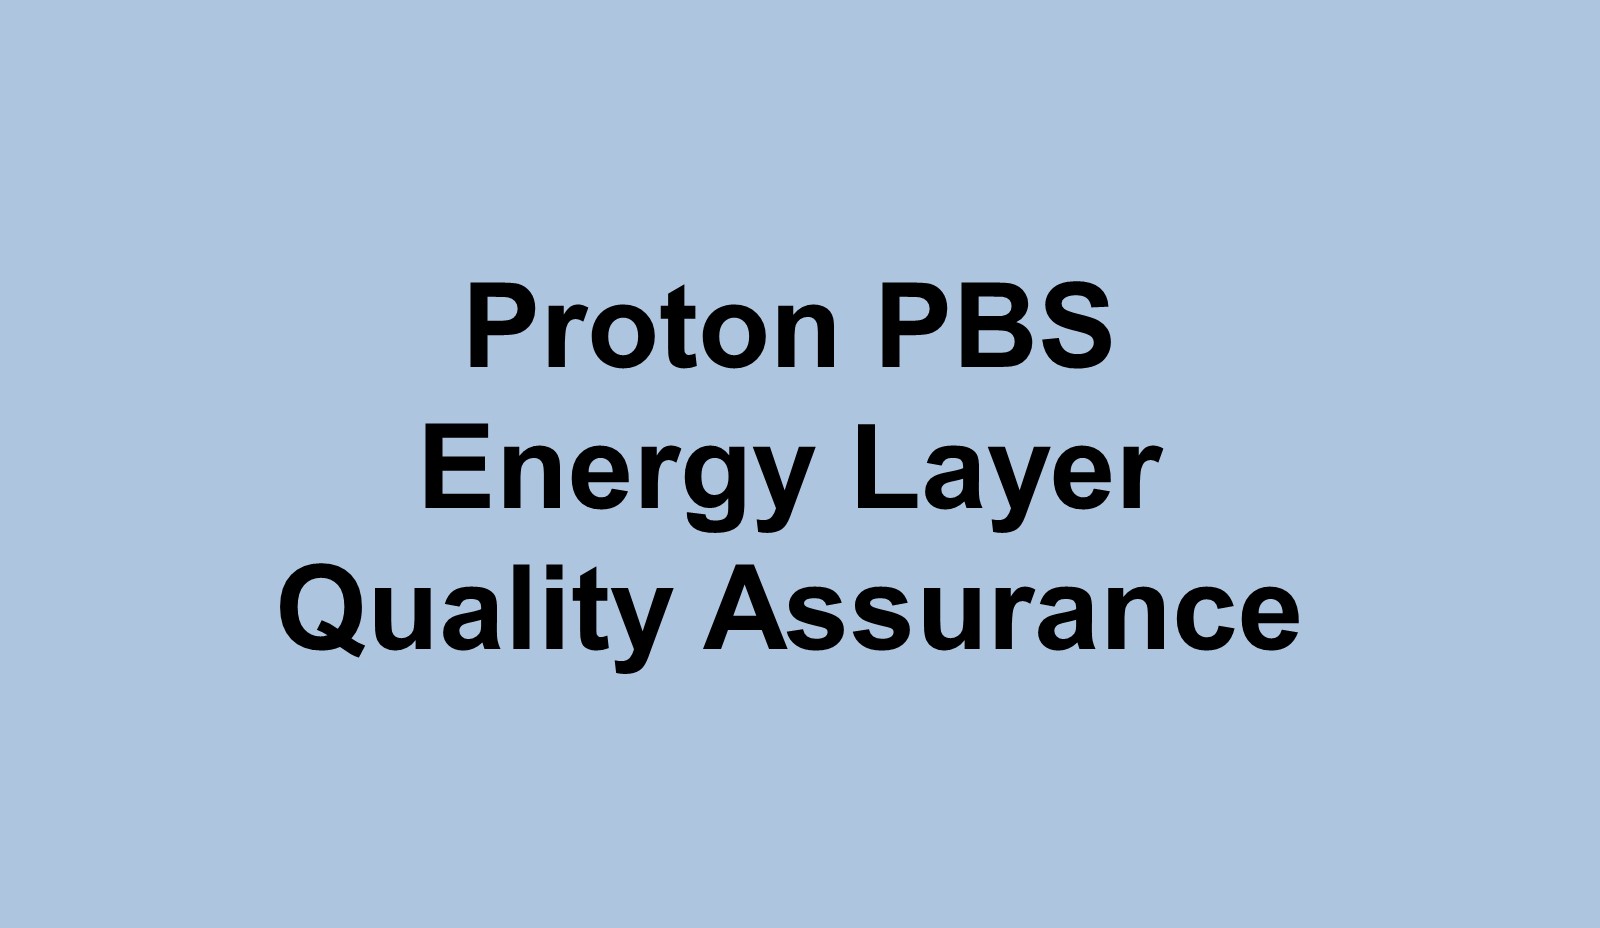 Proton PBS Energy Layer Quality Assurance - 1